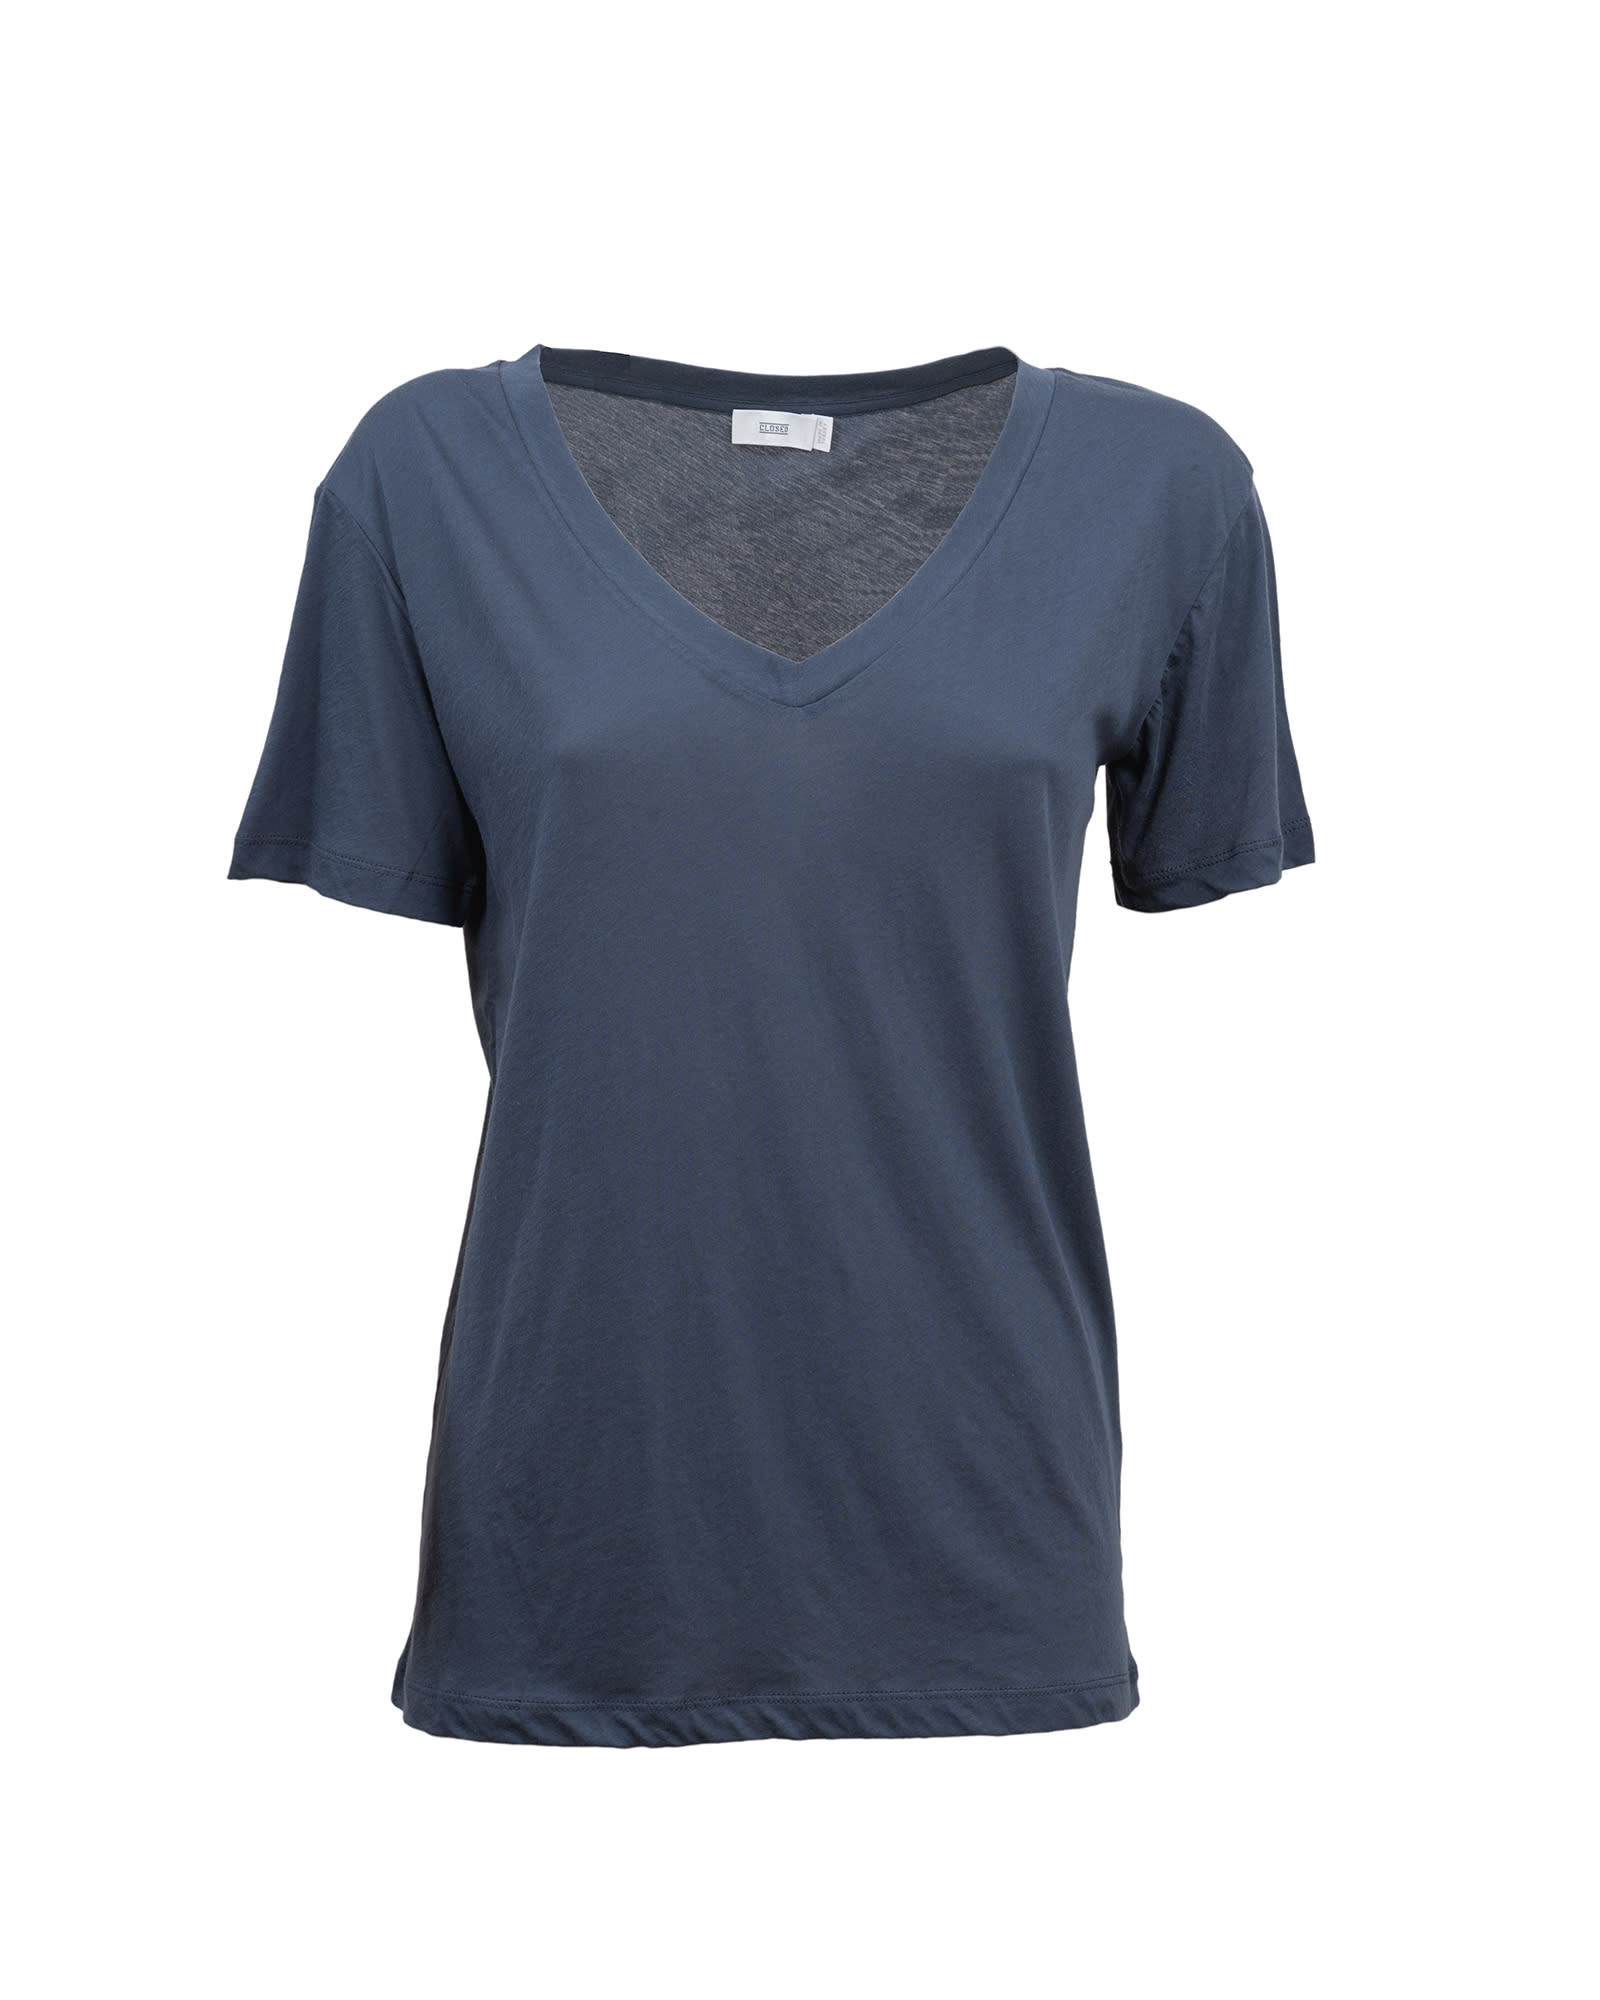 Closed cotton jersey t-shirt